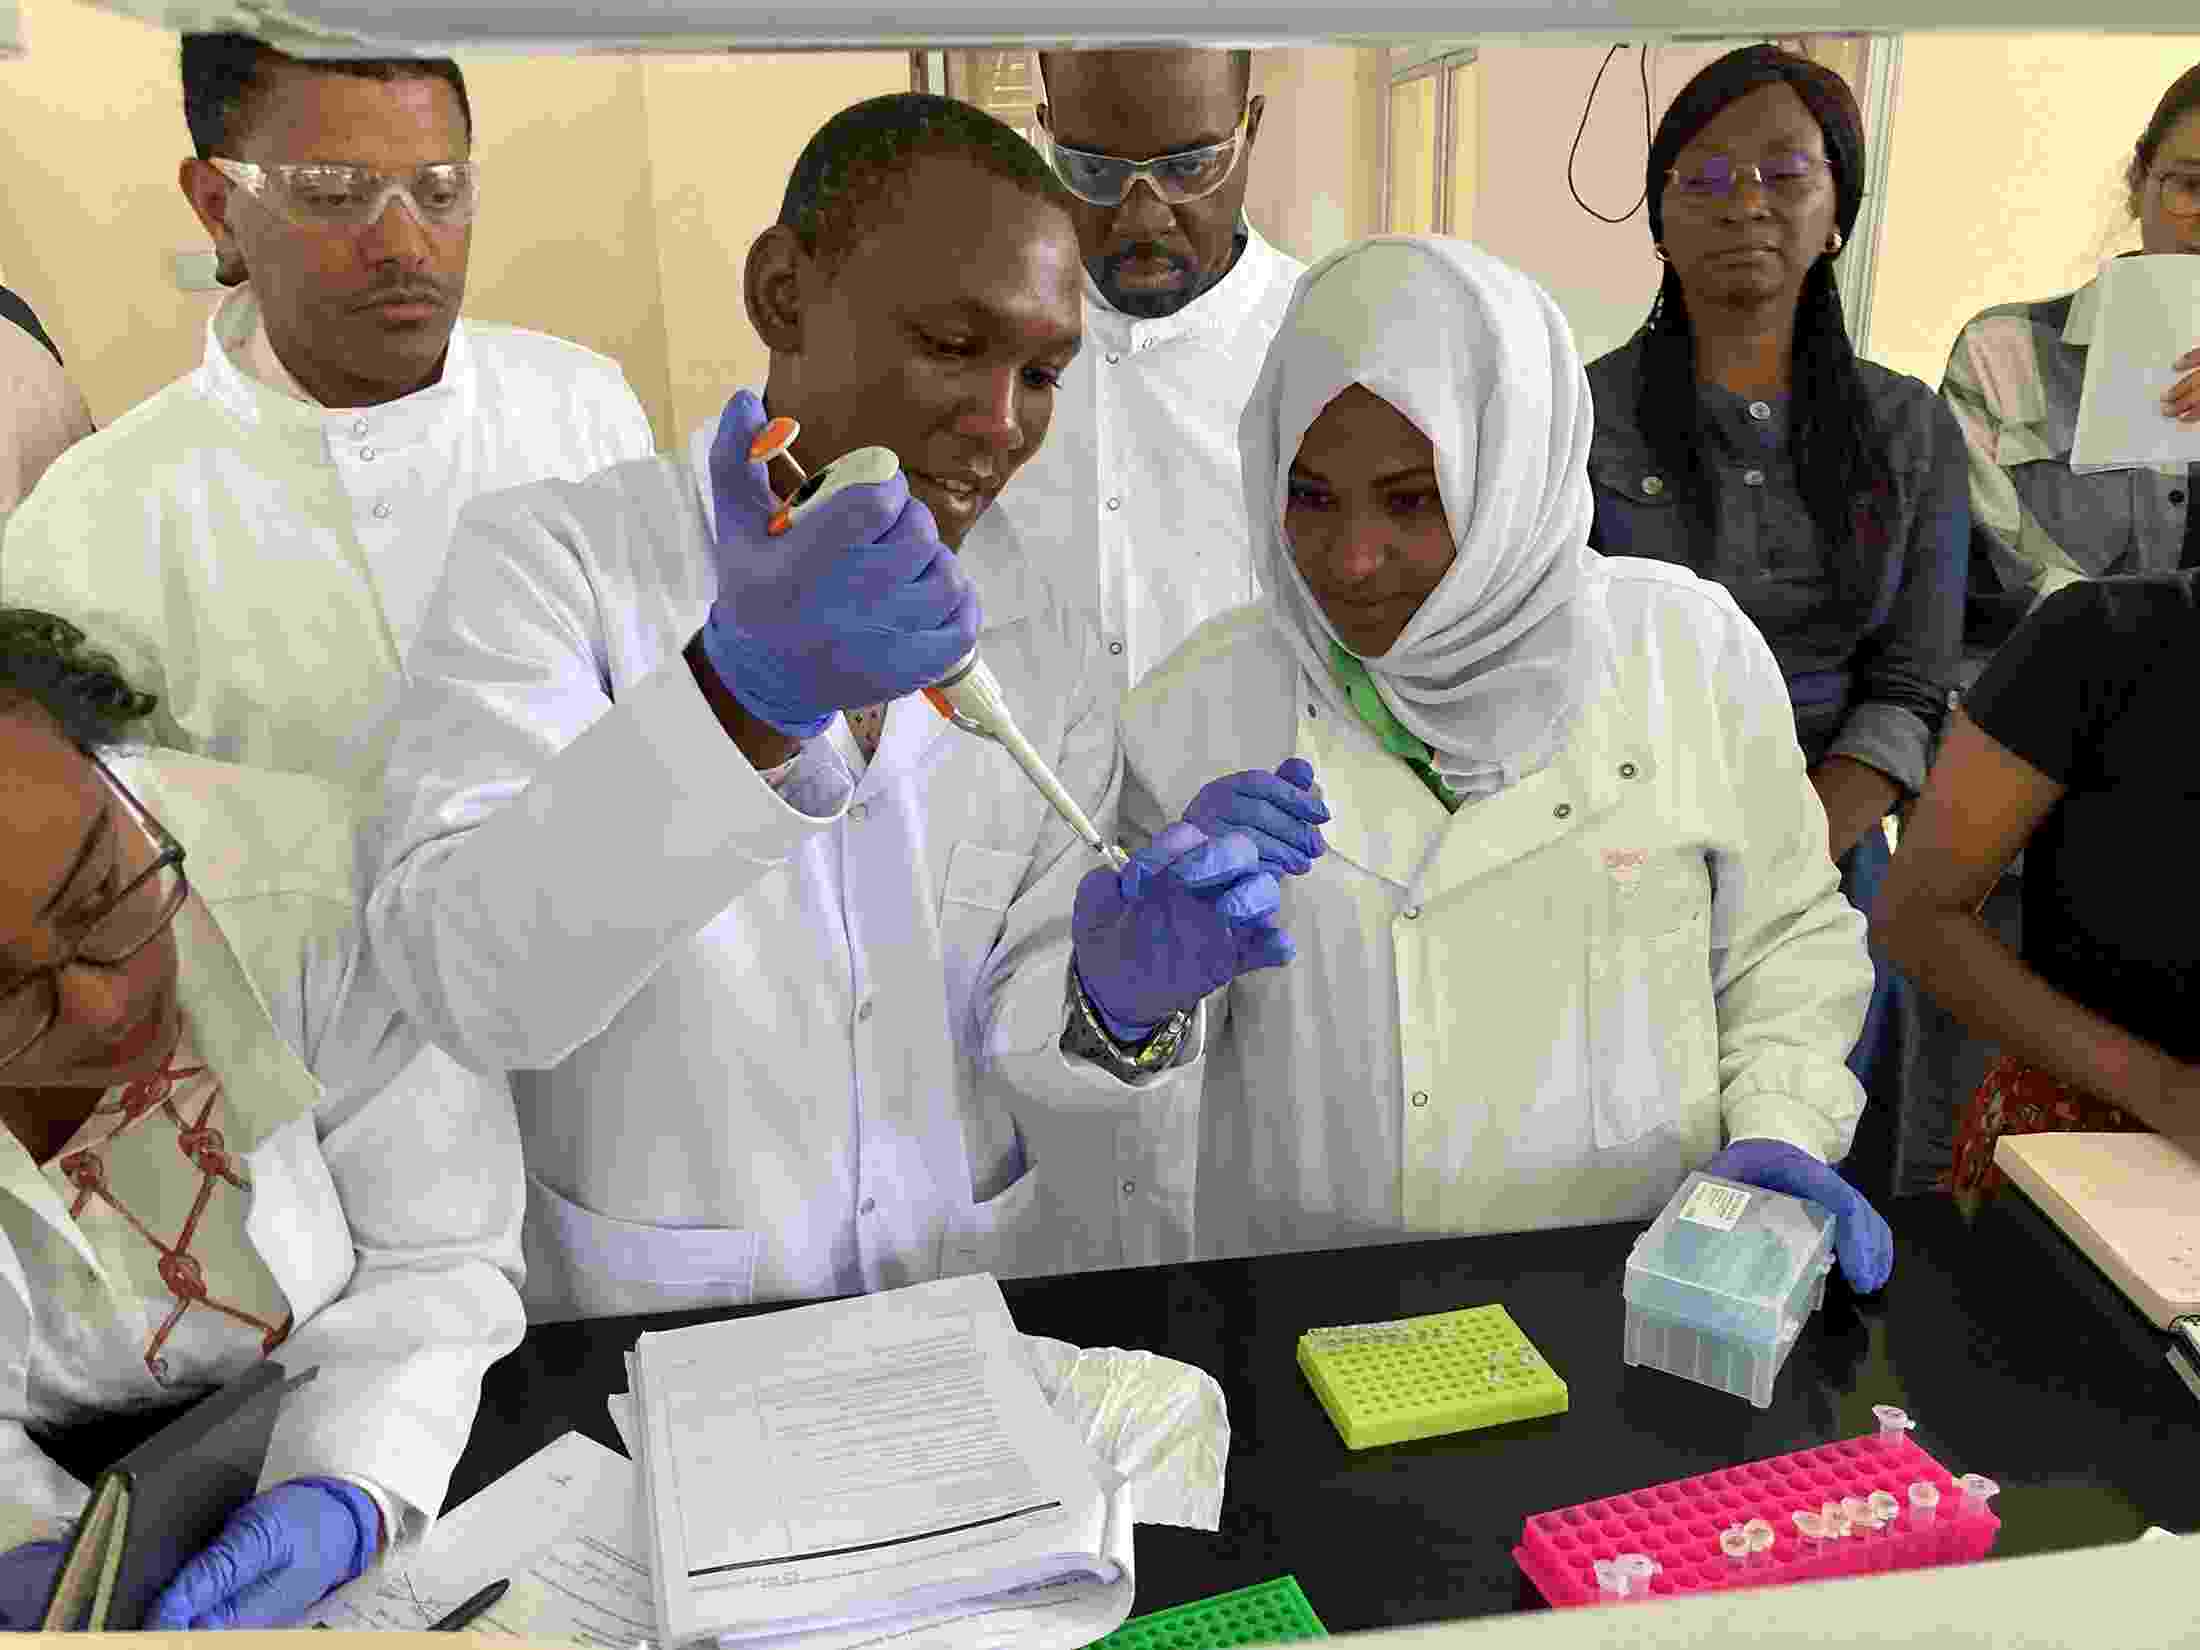 Several people wearing protective lab clothing gather round a workbench, using laboratory equipment to test water samples